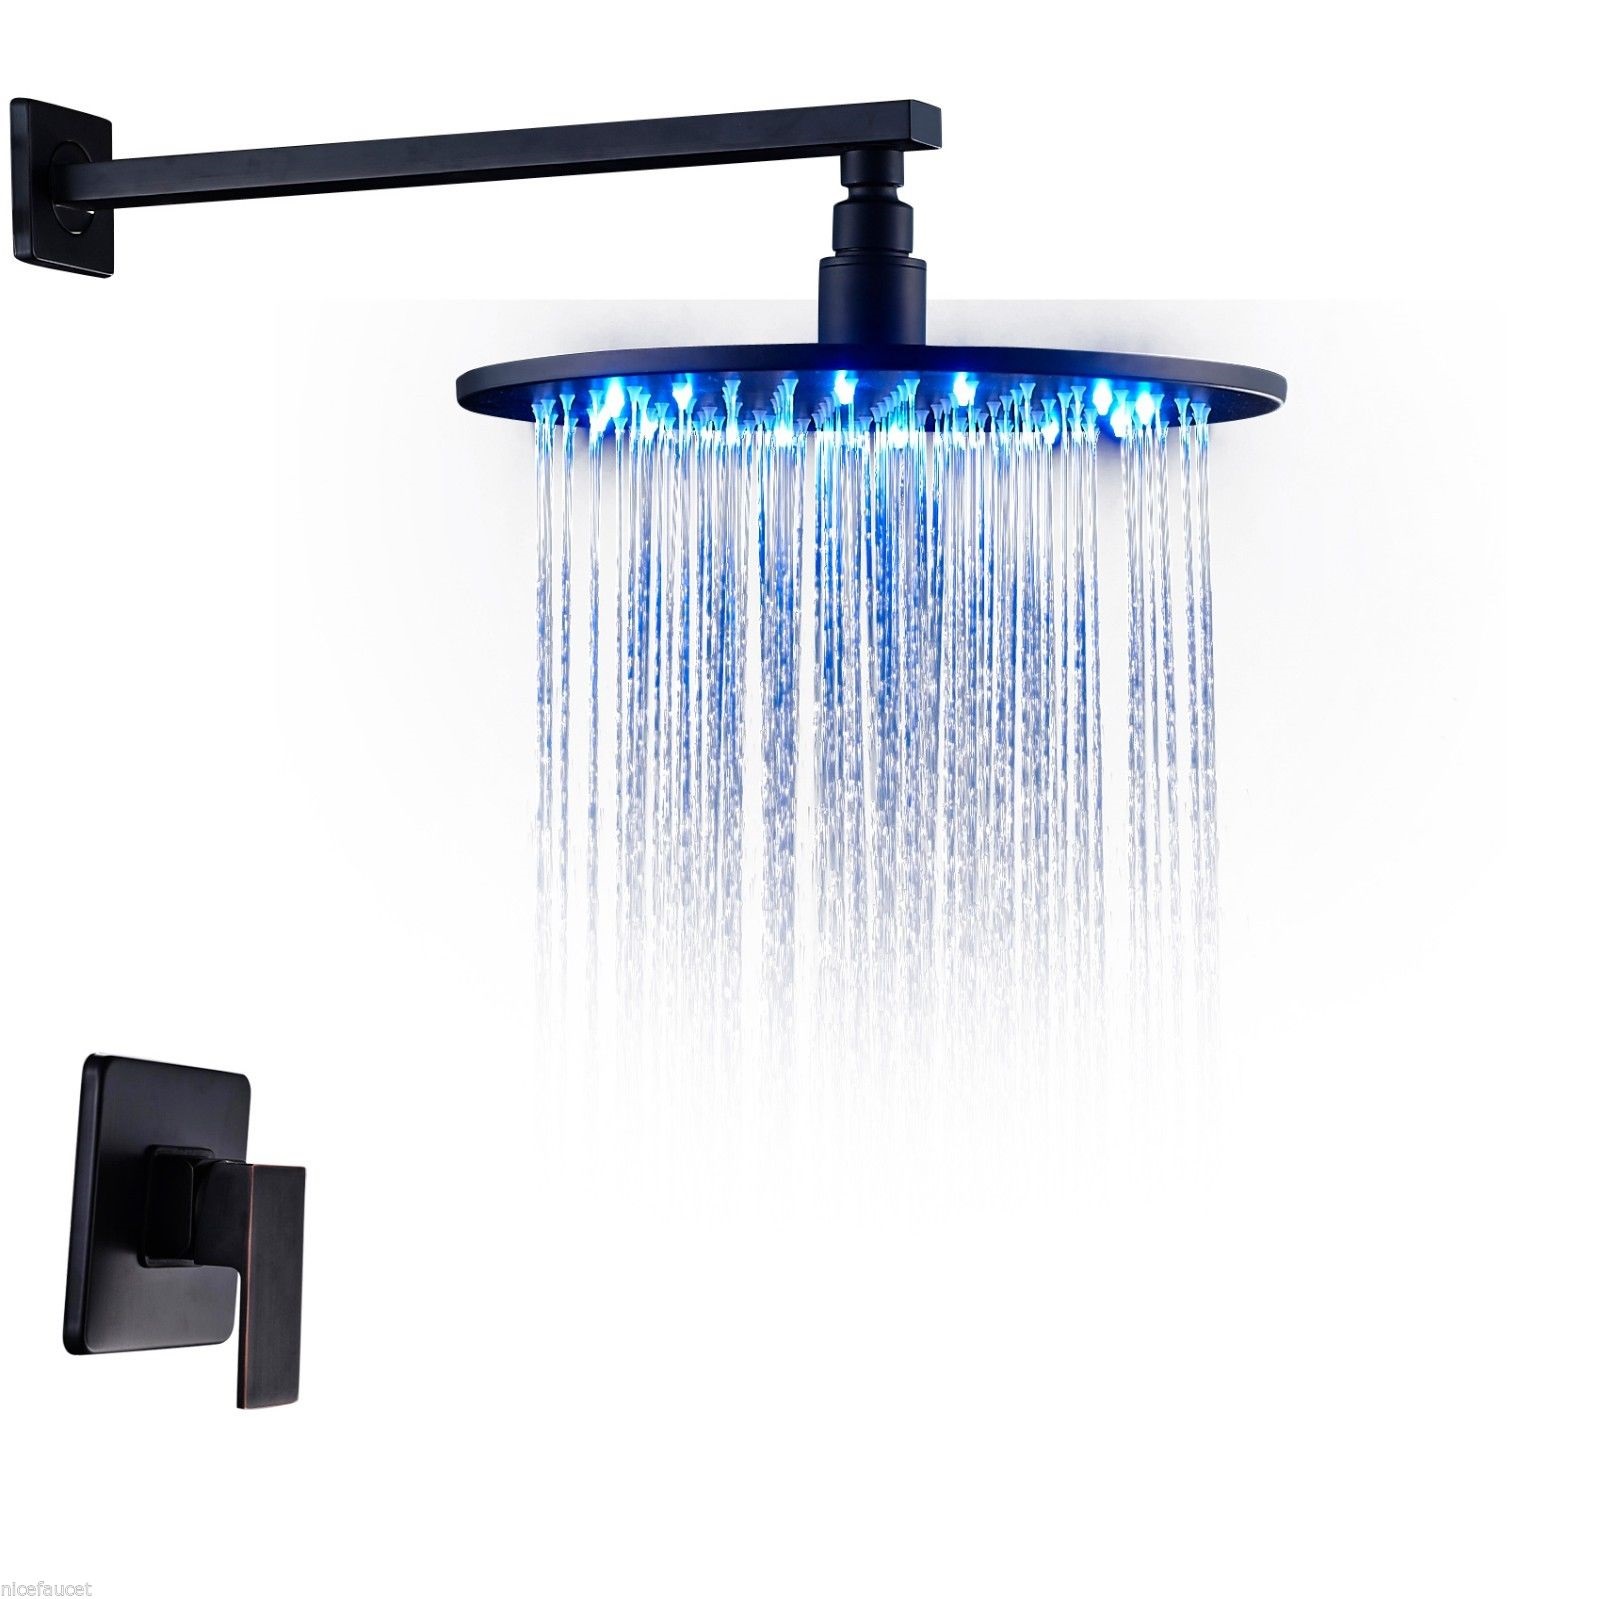 Fontana Oil Rubbed Bronze Bathroom Rain Shower System one Week Sale! With LED Color